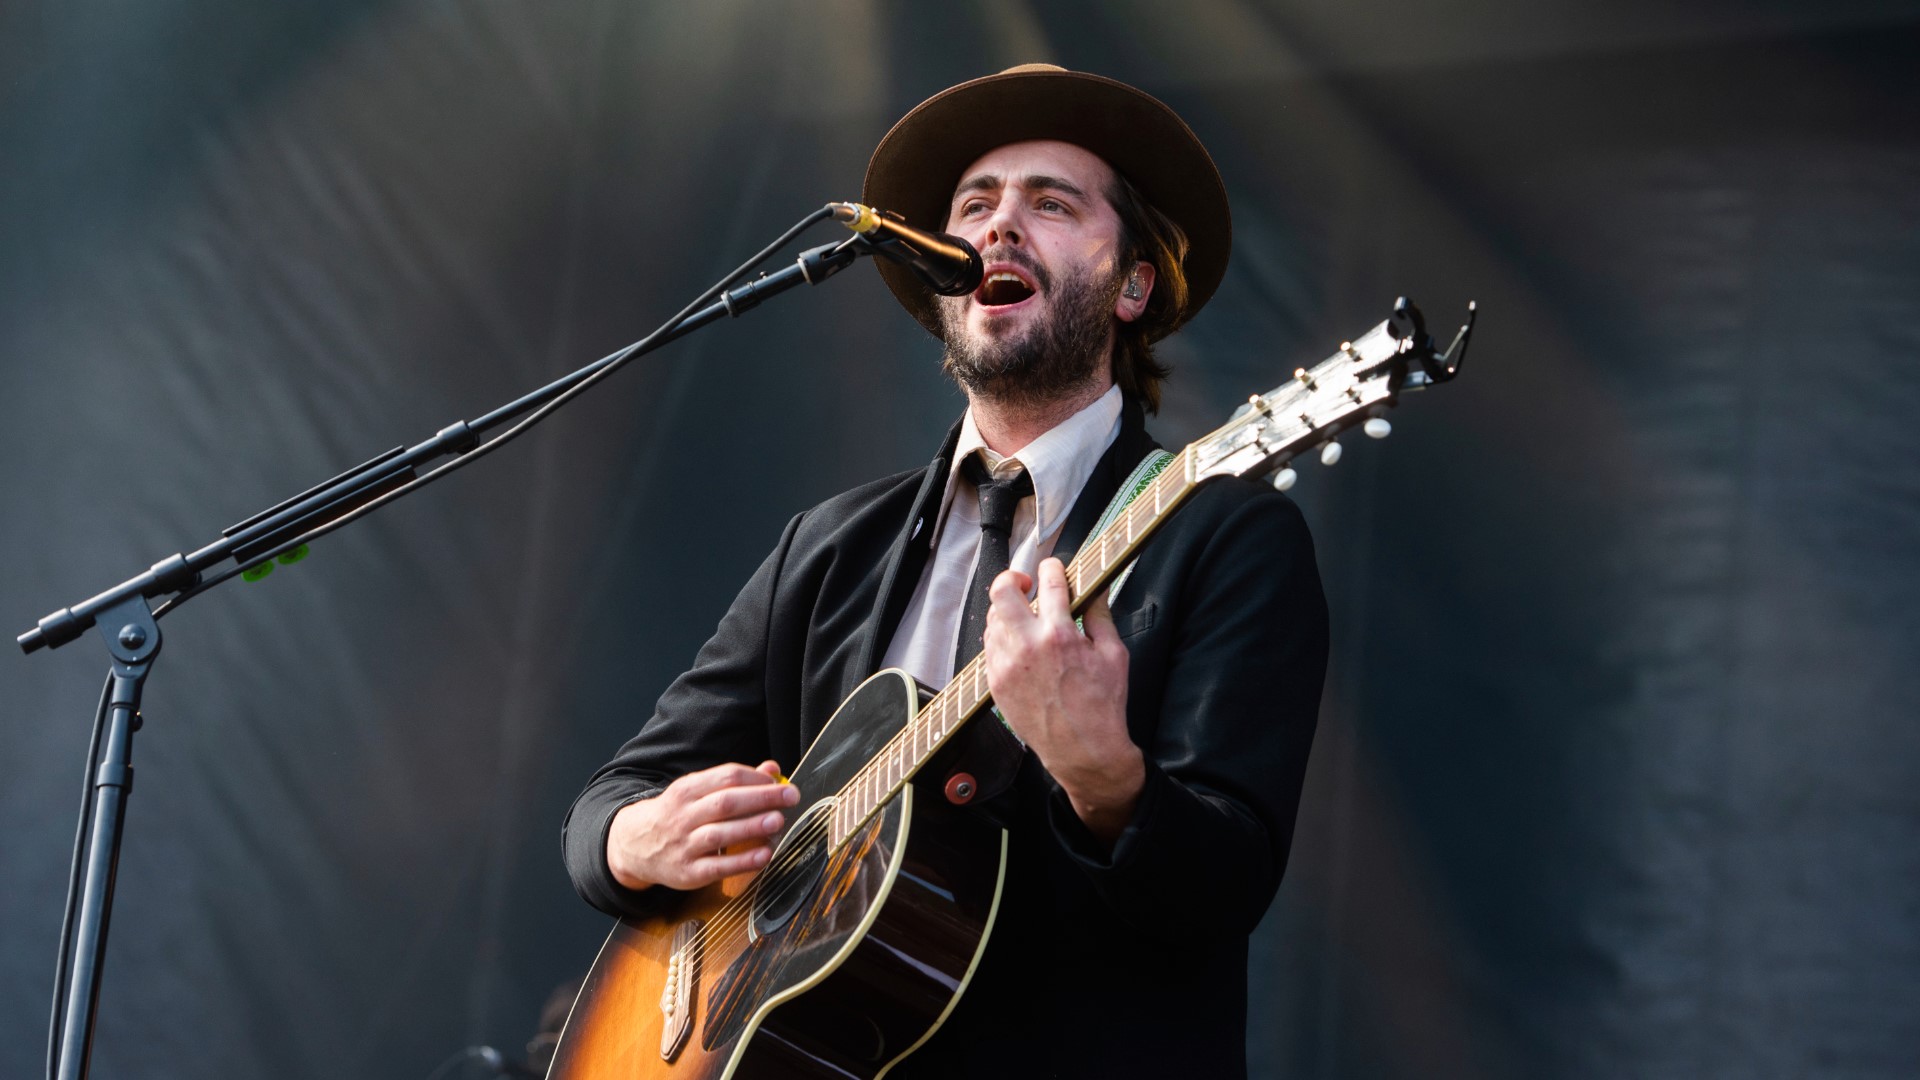 Indie-folk bands Lord Huron and First Aid Kit will take the stage for the first performance of the series on Aug. 20.